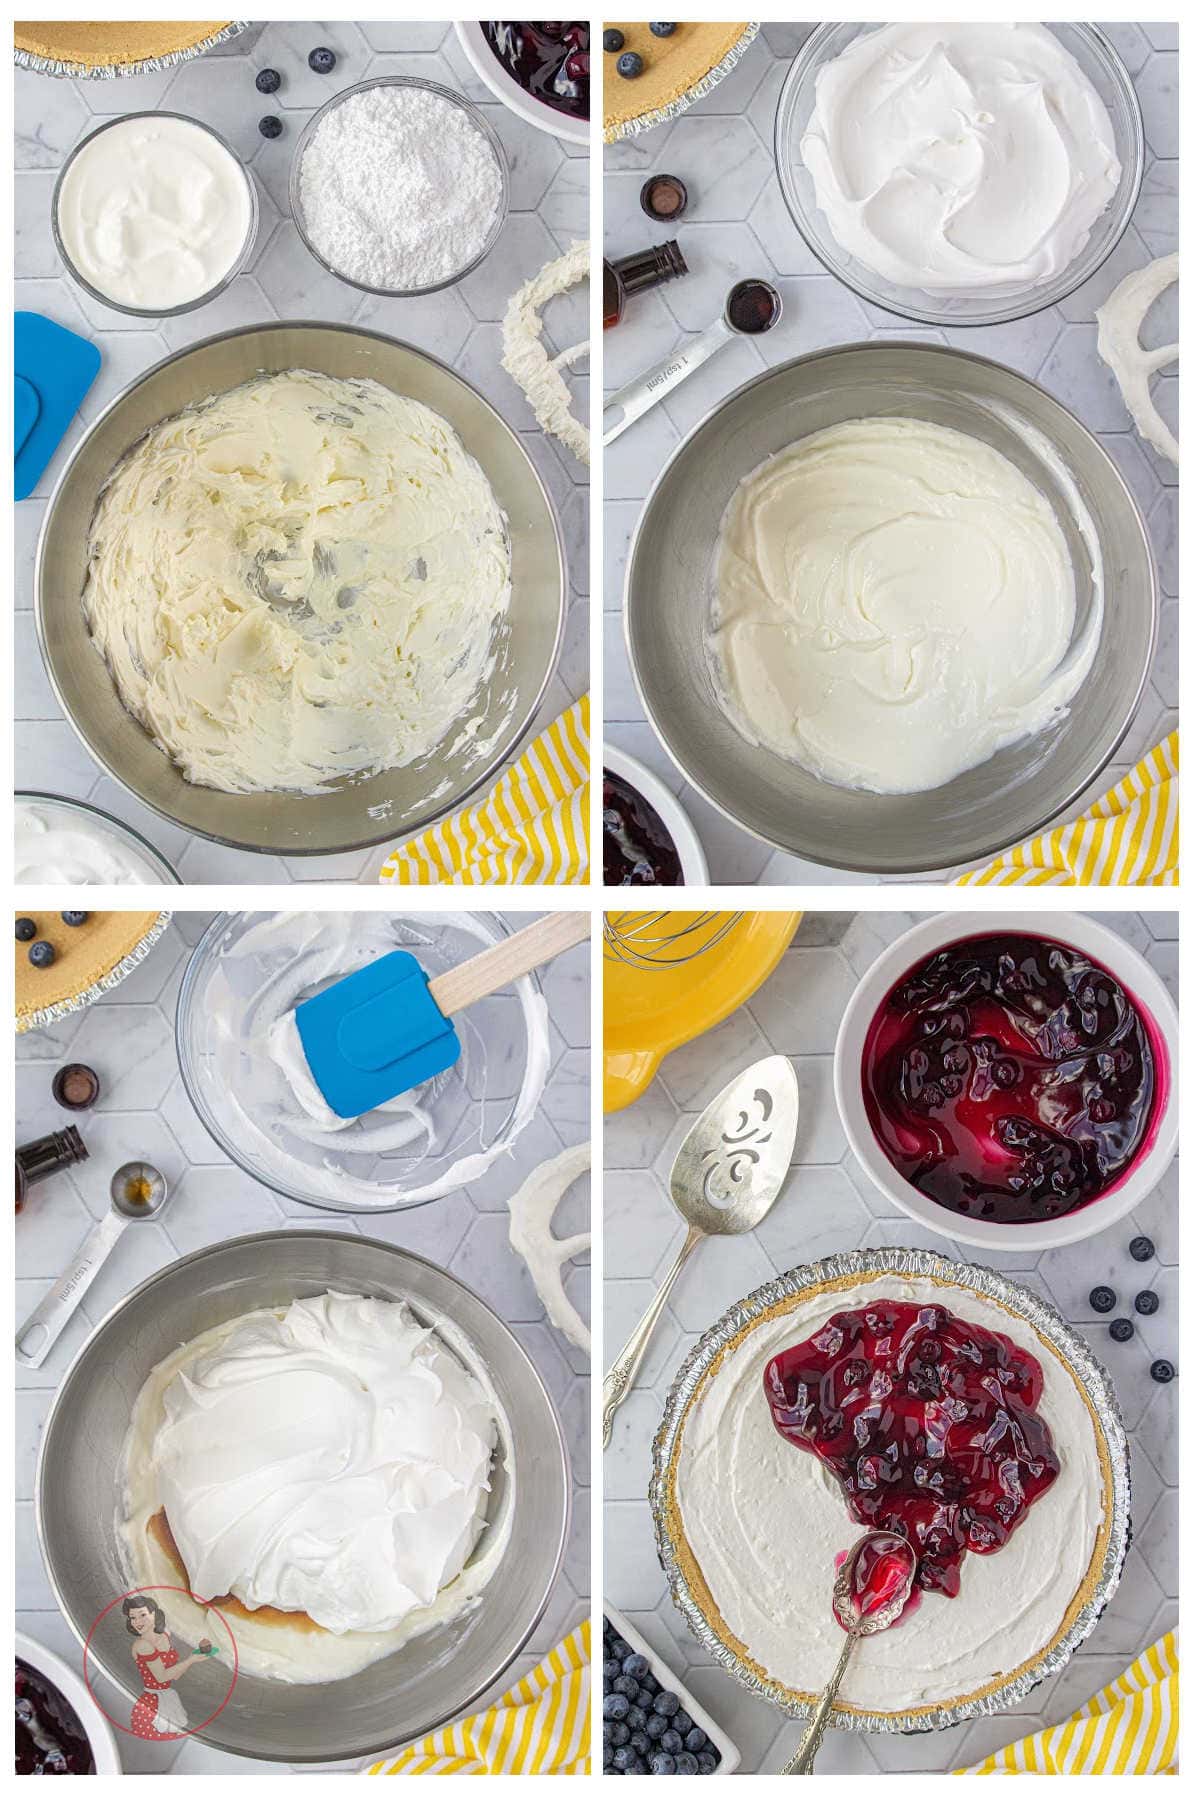 Step by step images showing how to make this no bake cheesecake.